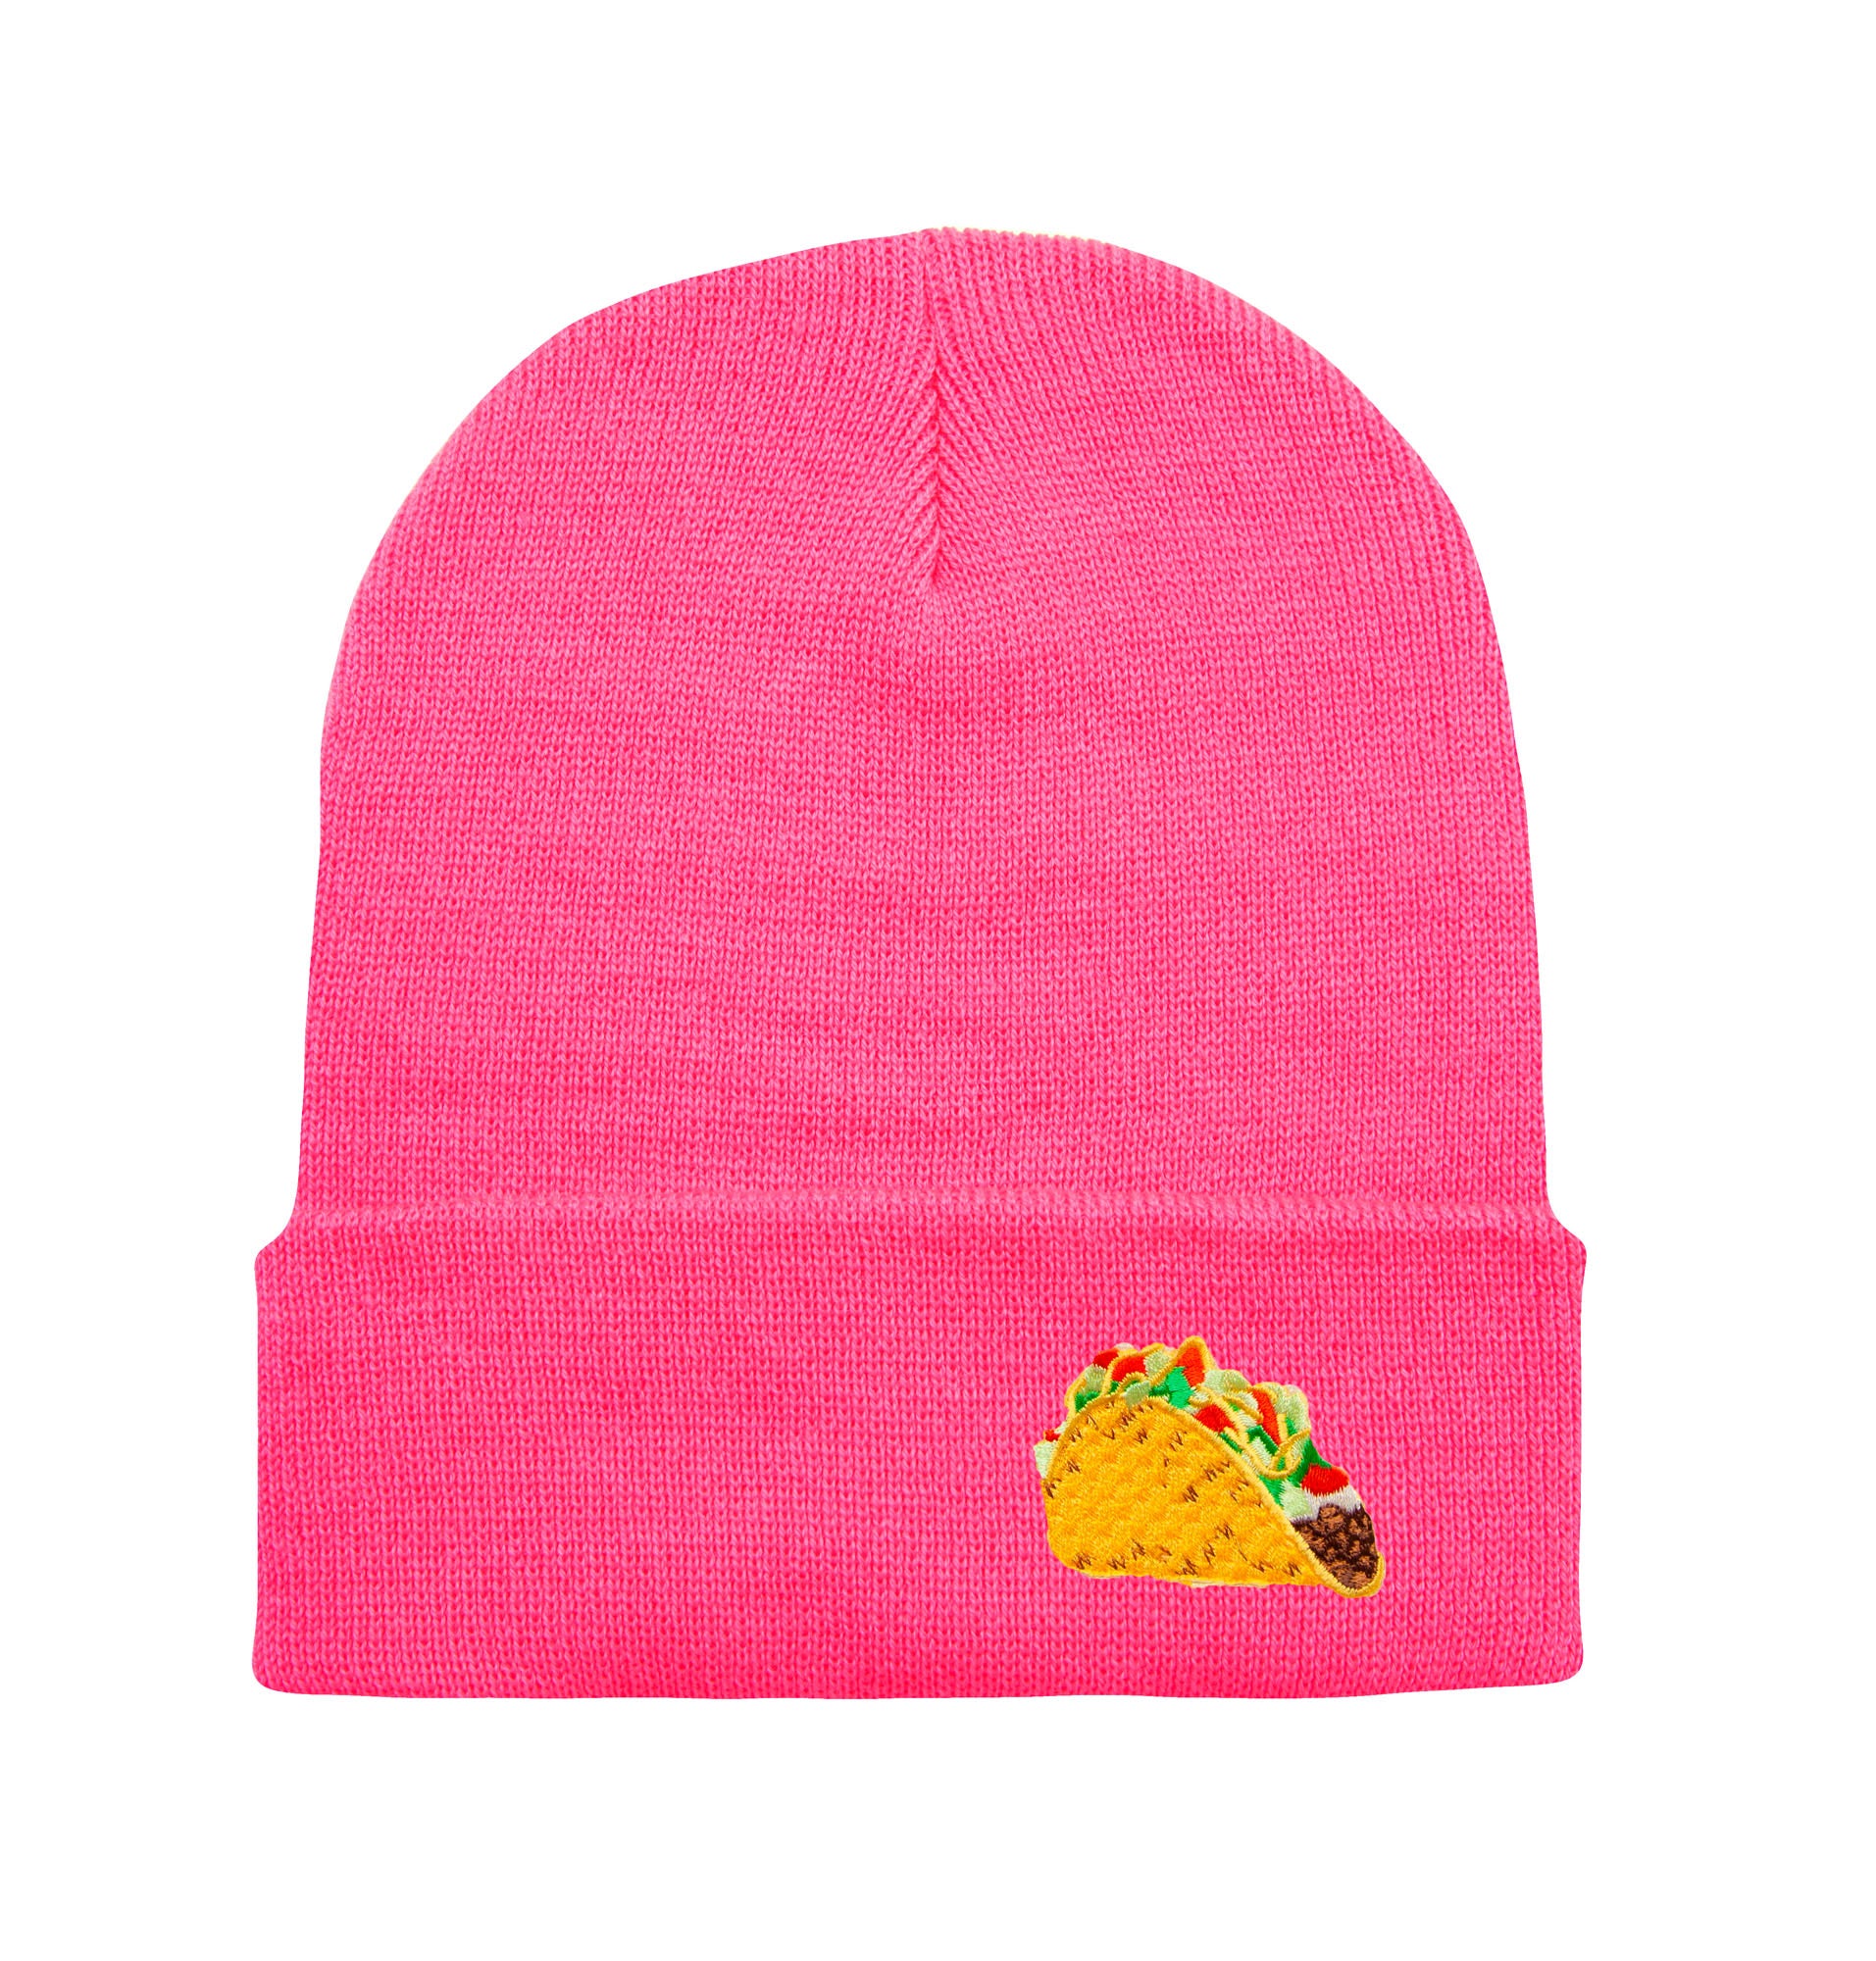 The Hat - Hot Pink